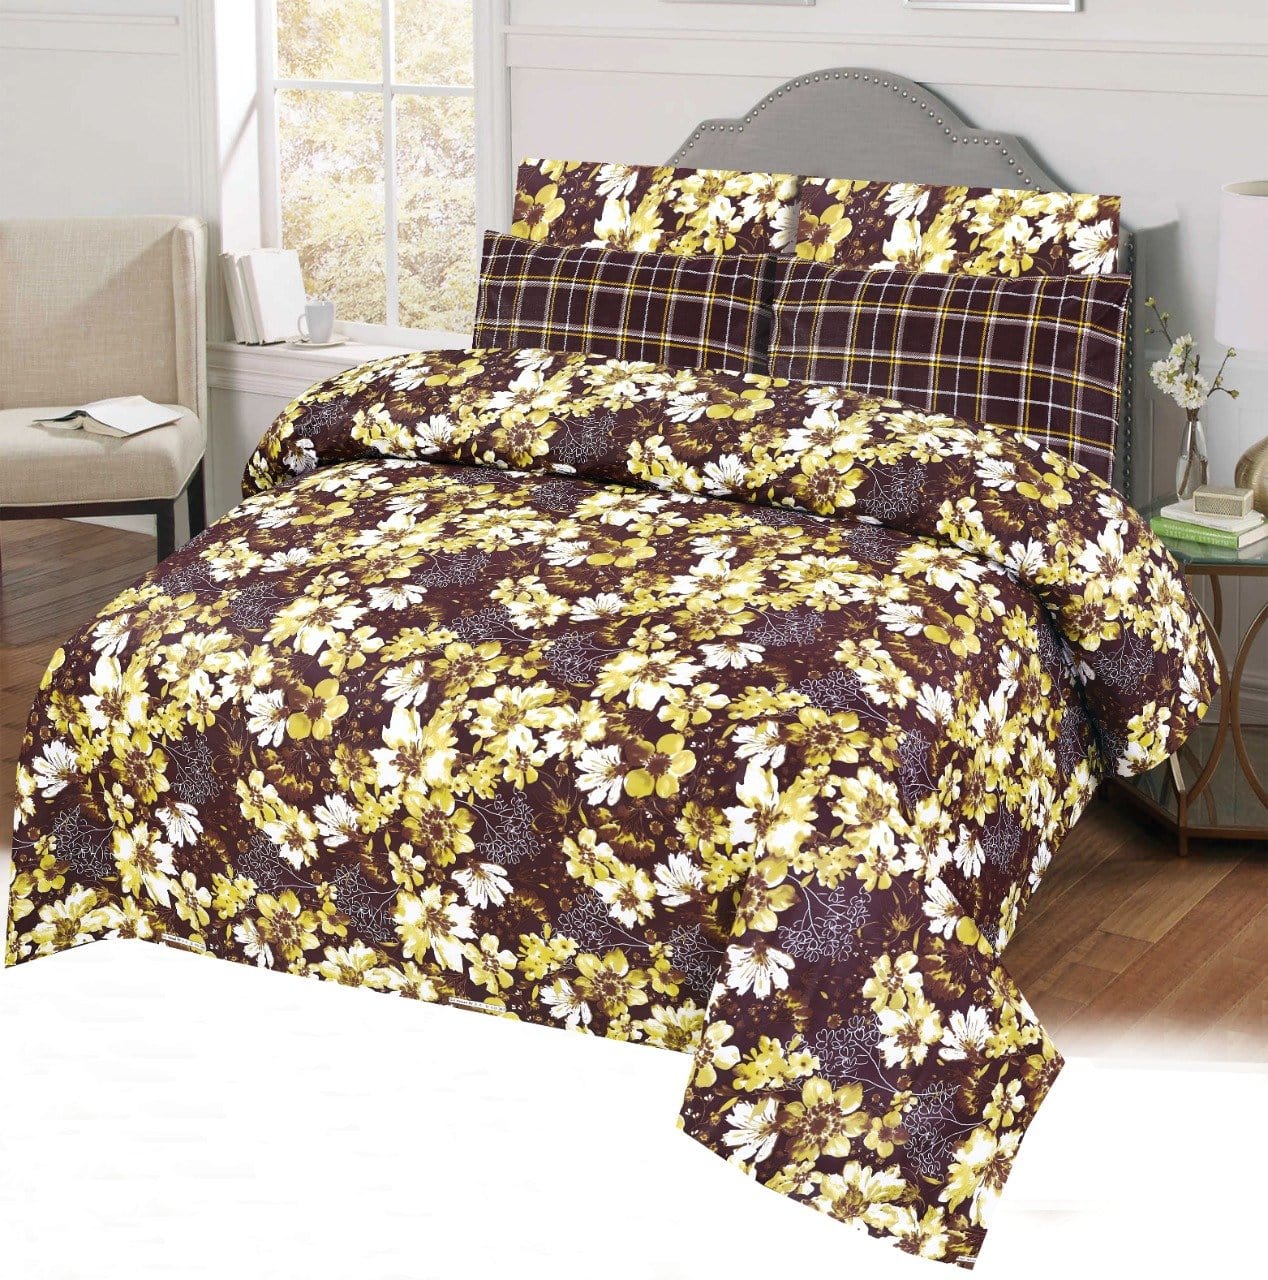 Grace D444-Cotton PC King Size Bedsheet with 2 Pillow Covers.